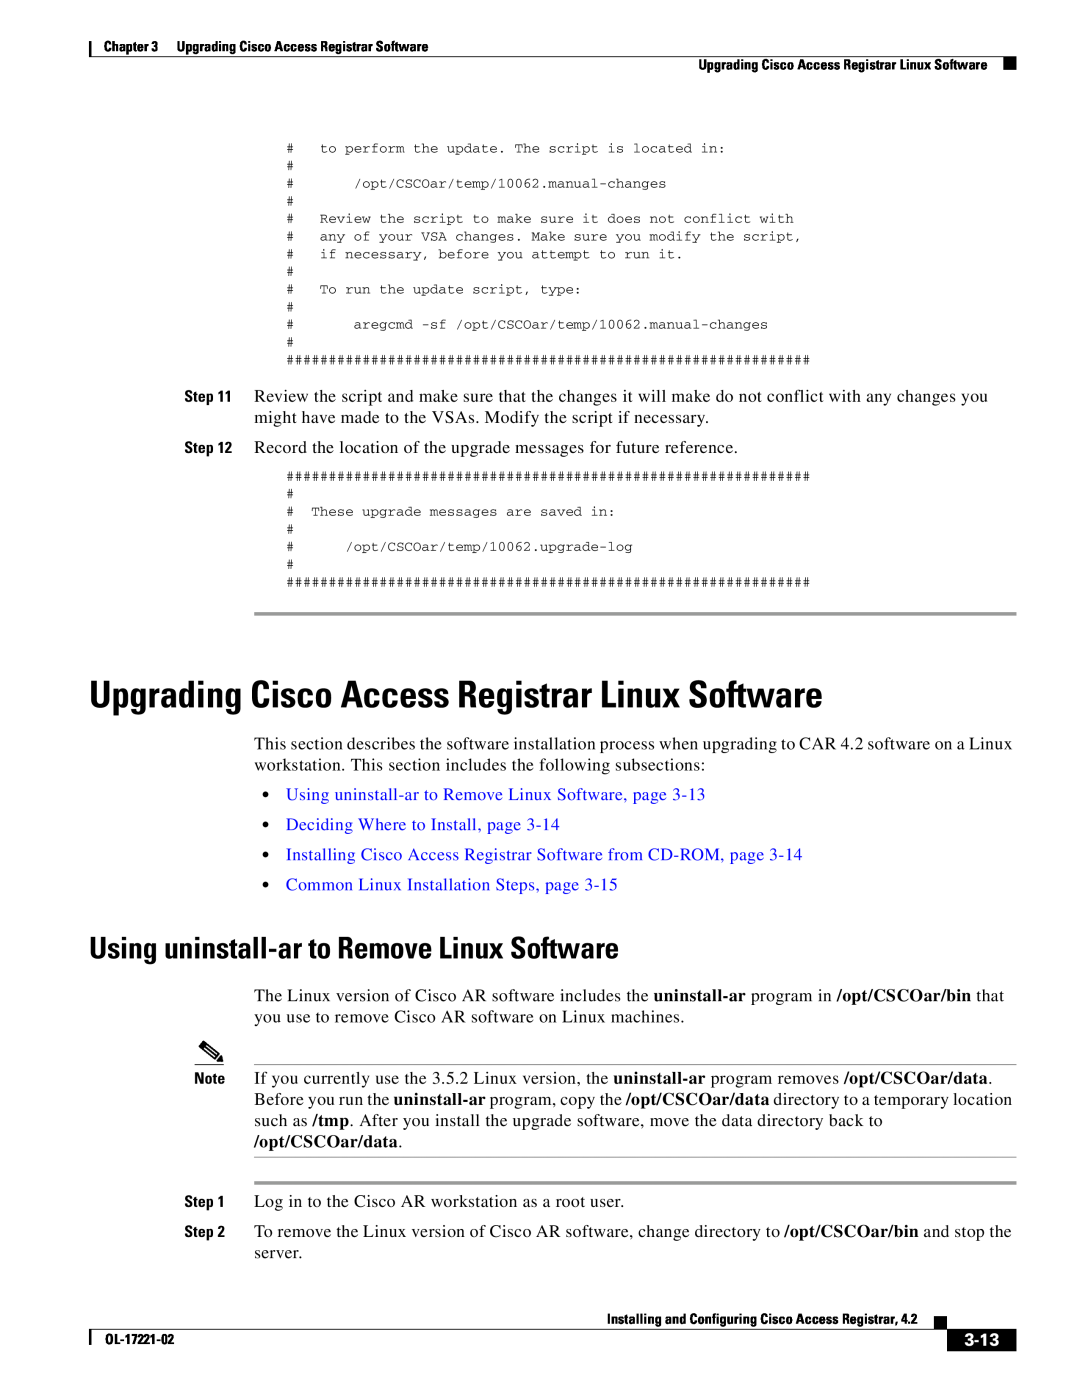 Cisco Systems 4.2 Upgrading Cisco Access Registrar Linux Software, Using uninstall-ar to Remove Linux Software, page, 3-13 